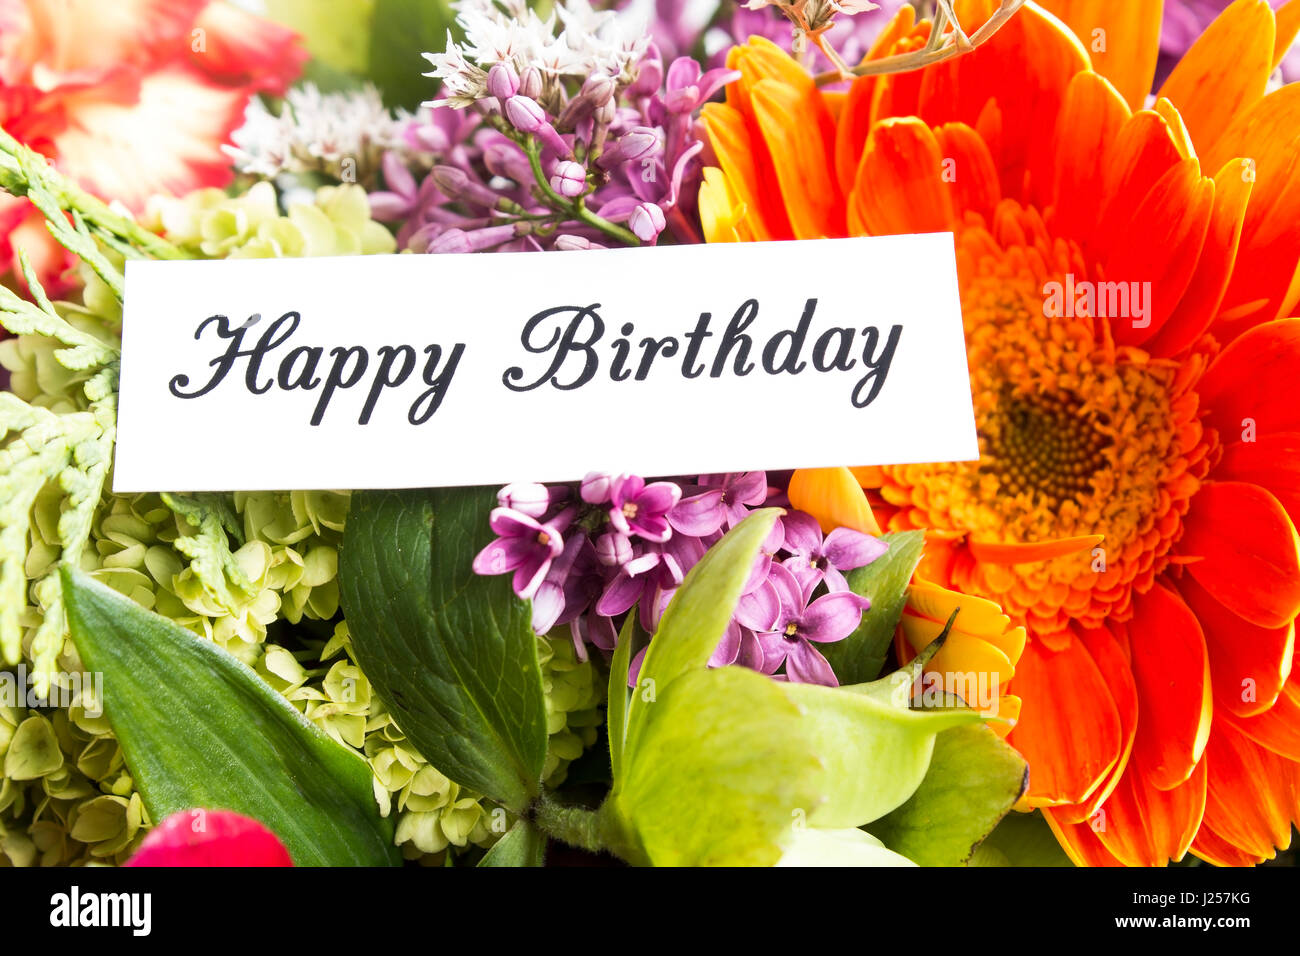 203 Happy Birthday Card Bouquet Orange Roses Stock Photos - Free &  Royalty-Free Stock Photos from Dreamstime